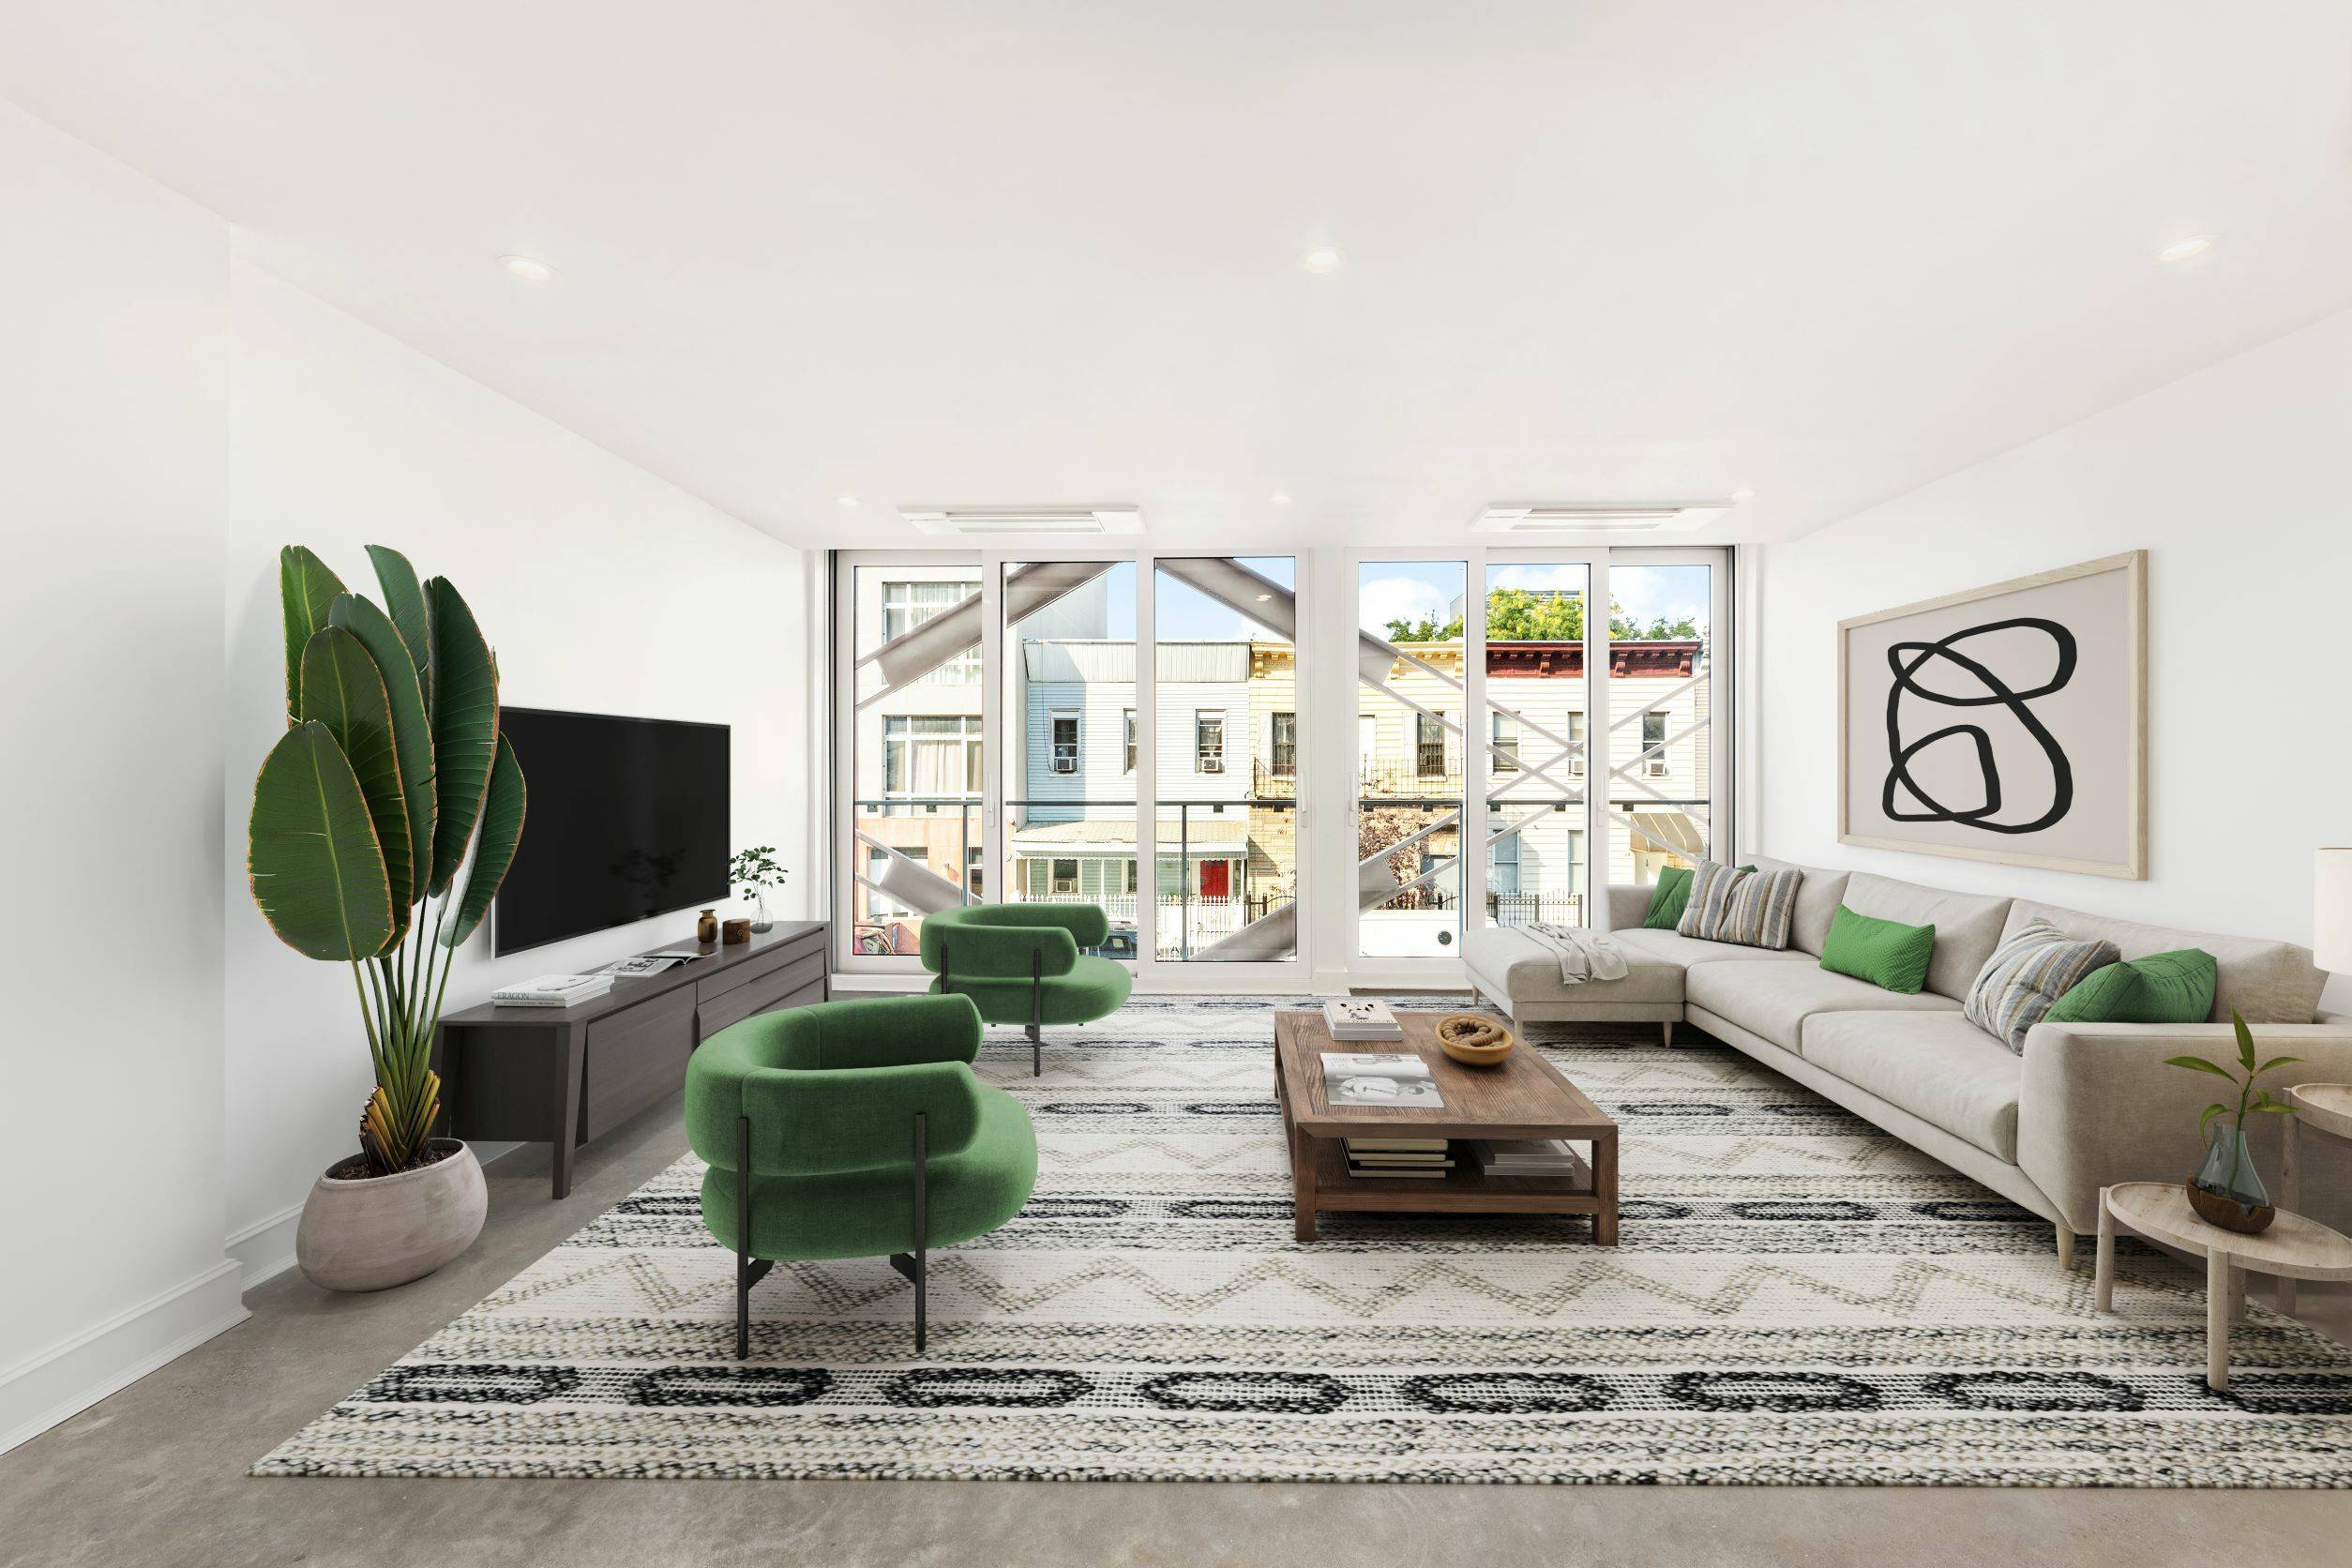 Introducing this brand new Bushwick condominium suffused with natural light, a chic 2 bedroom convertible 3 BR, 2 bathroom floor through home graced with statement finishes that exude luxury and ...